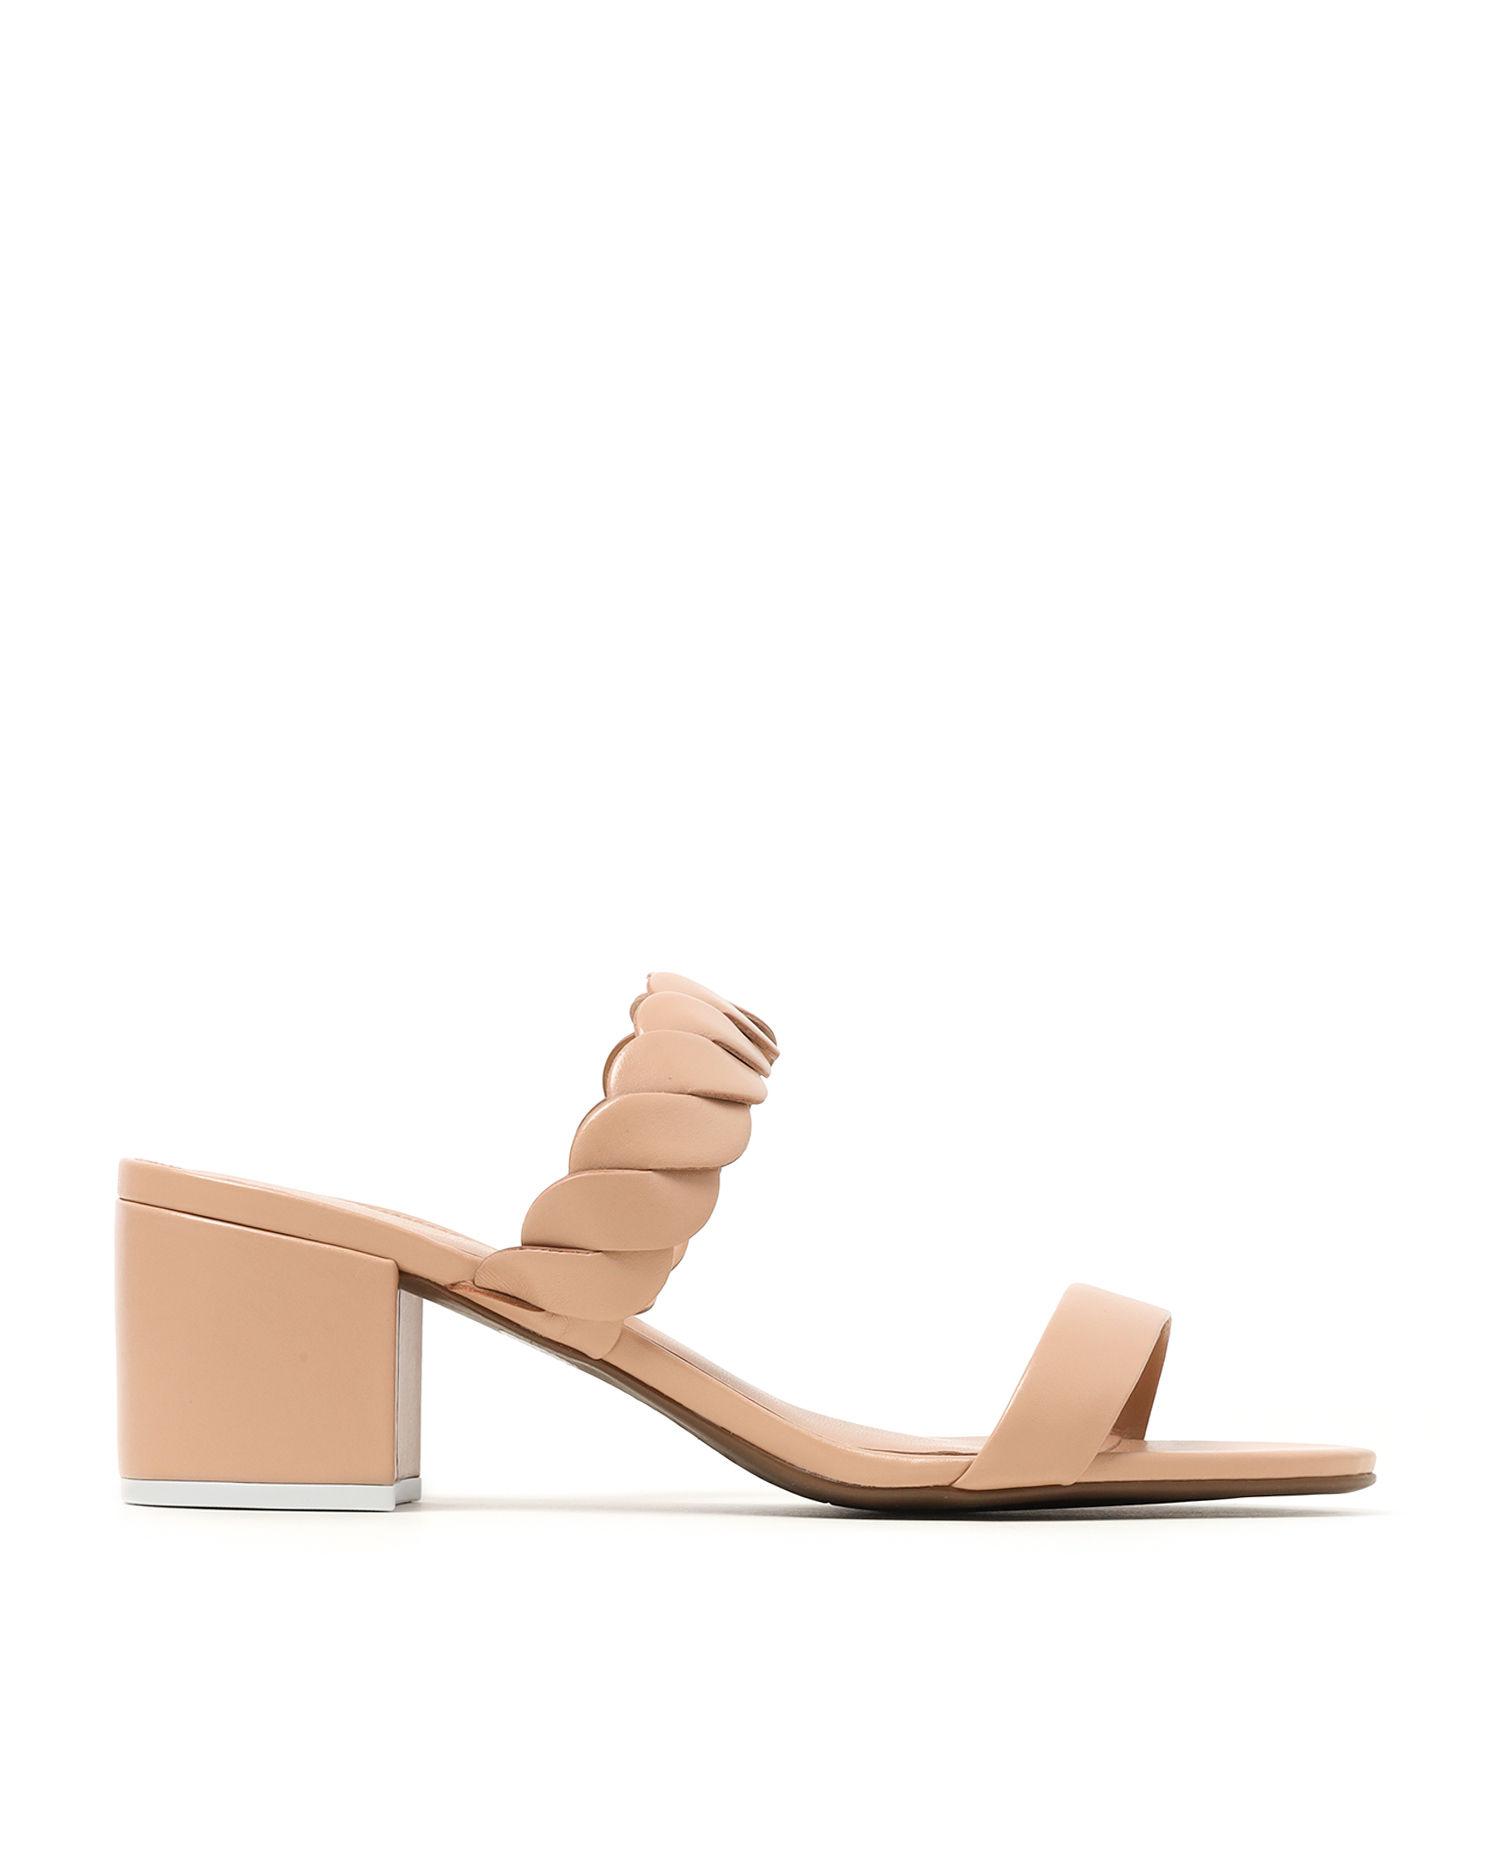 Heeled sandals by AREZZO